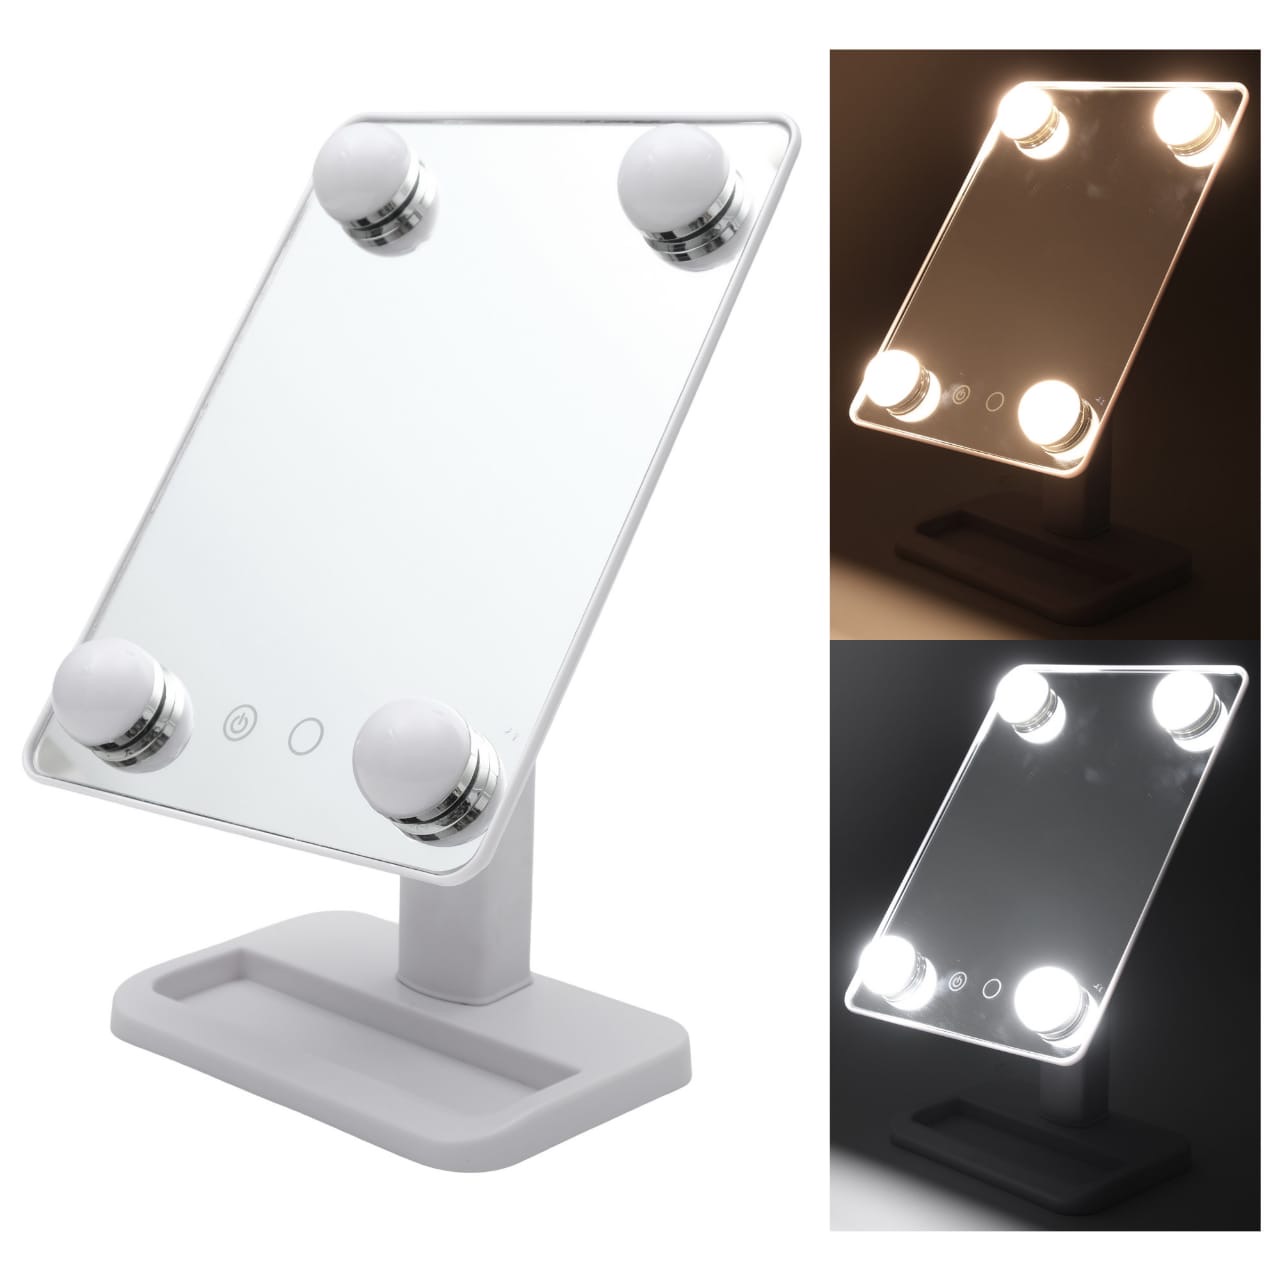 LED-MIRROR- Perfect Device for doing makeup and skincare